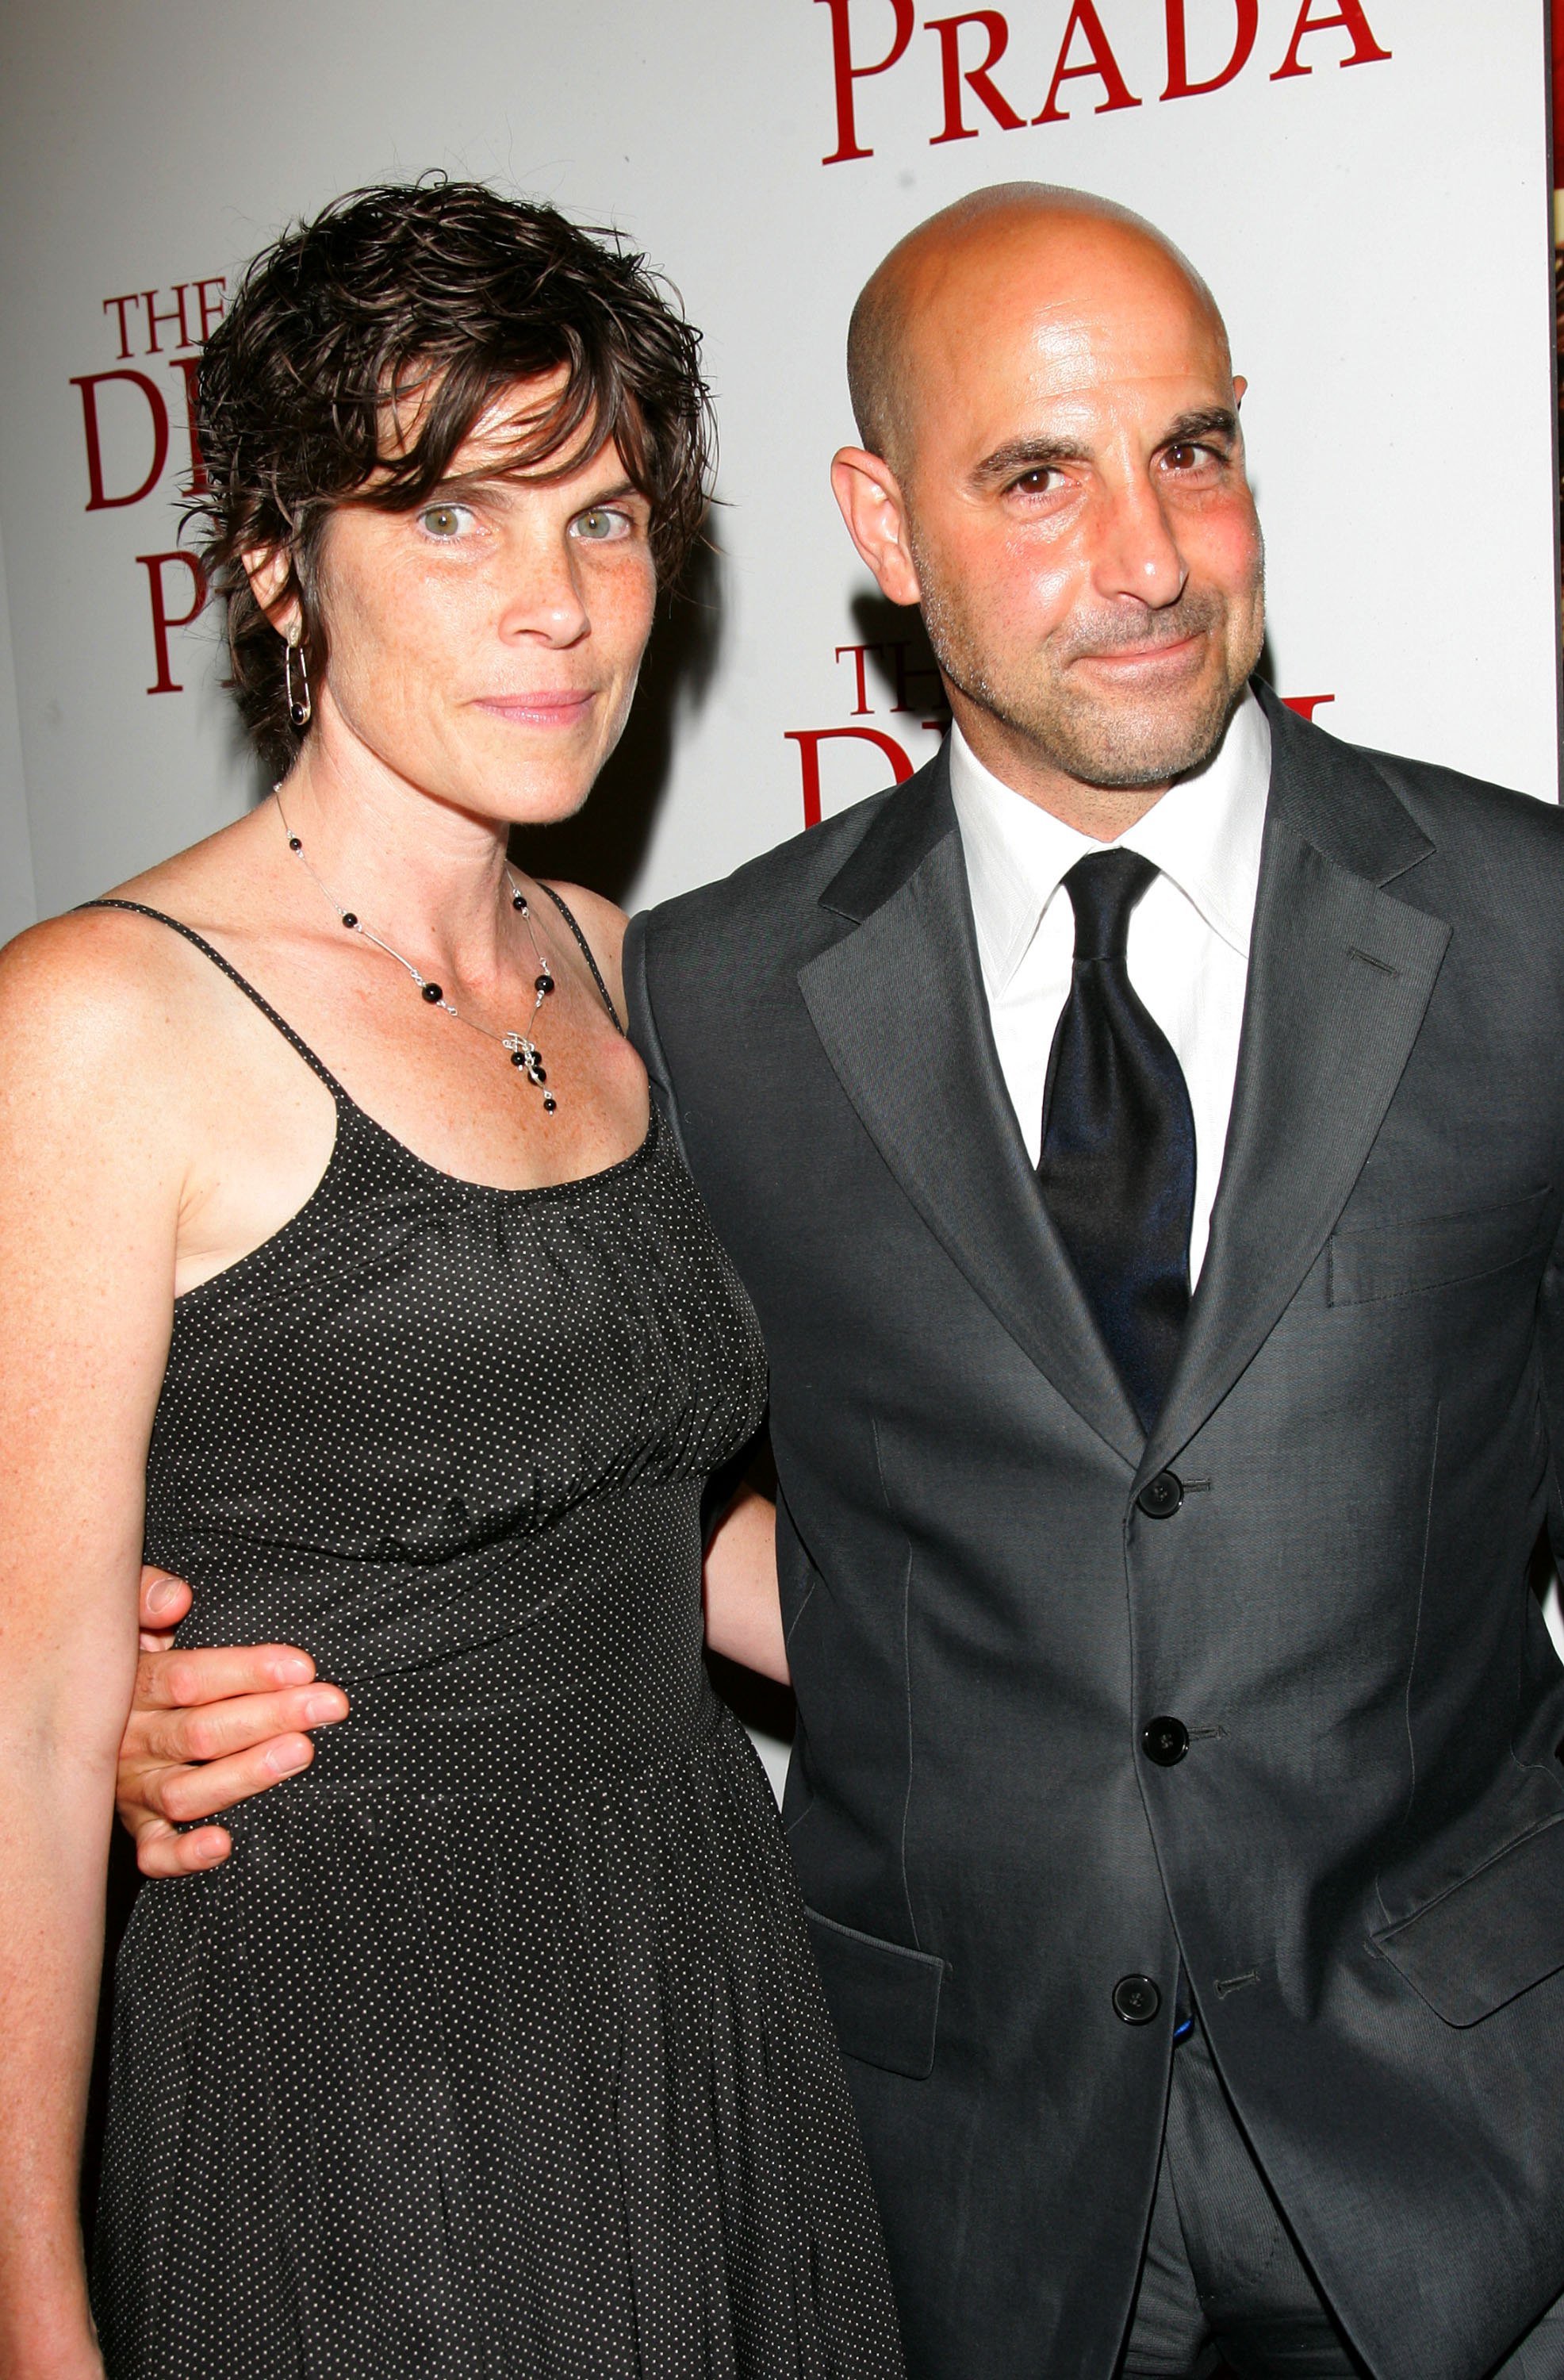 Stanley Tucci and his wife Kate at the premiere of "The Devil Wears Prada" at the Loews Lincoln Center Theatre in 2006 | Source: Getty Images